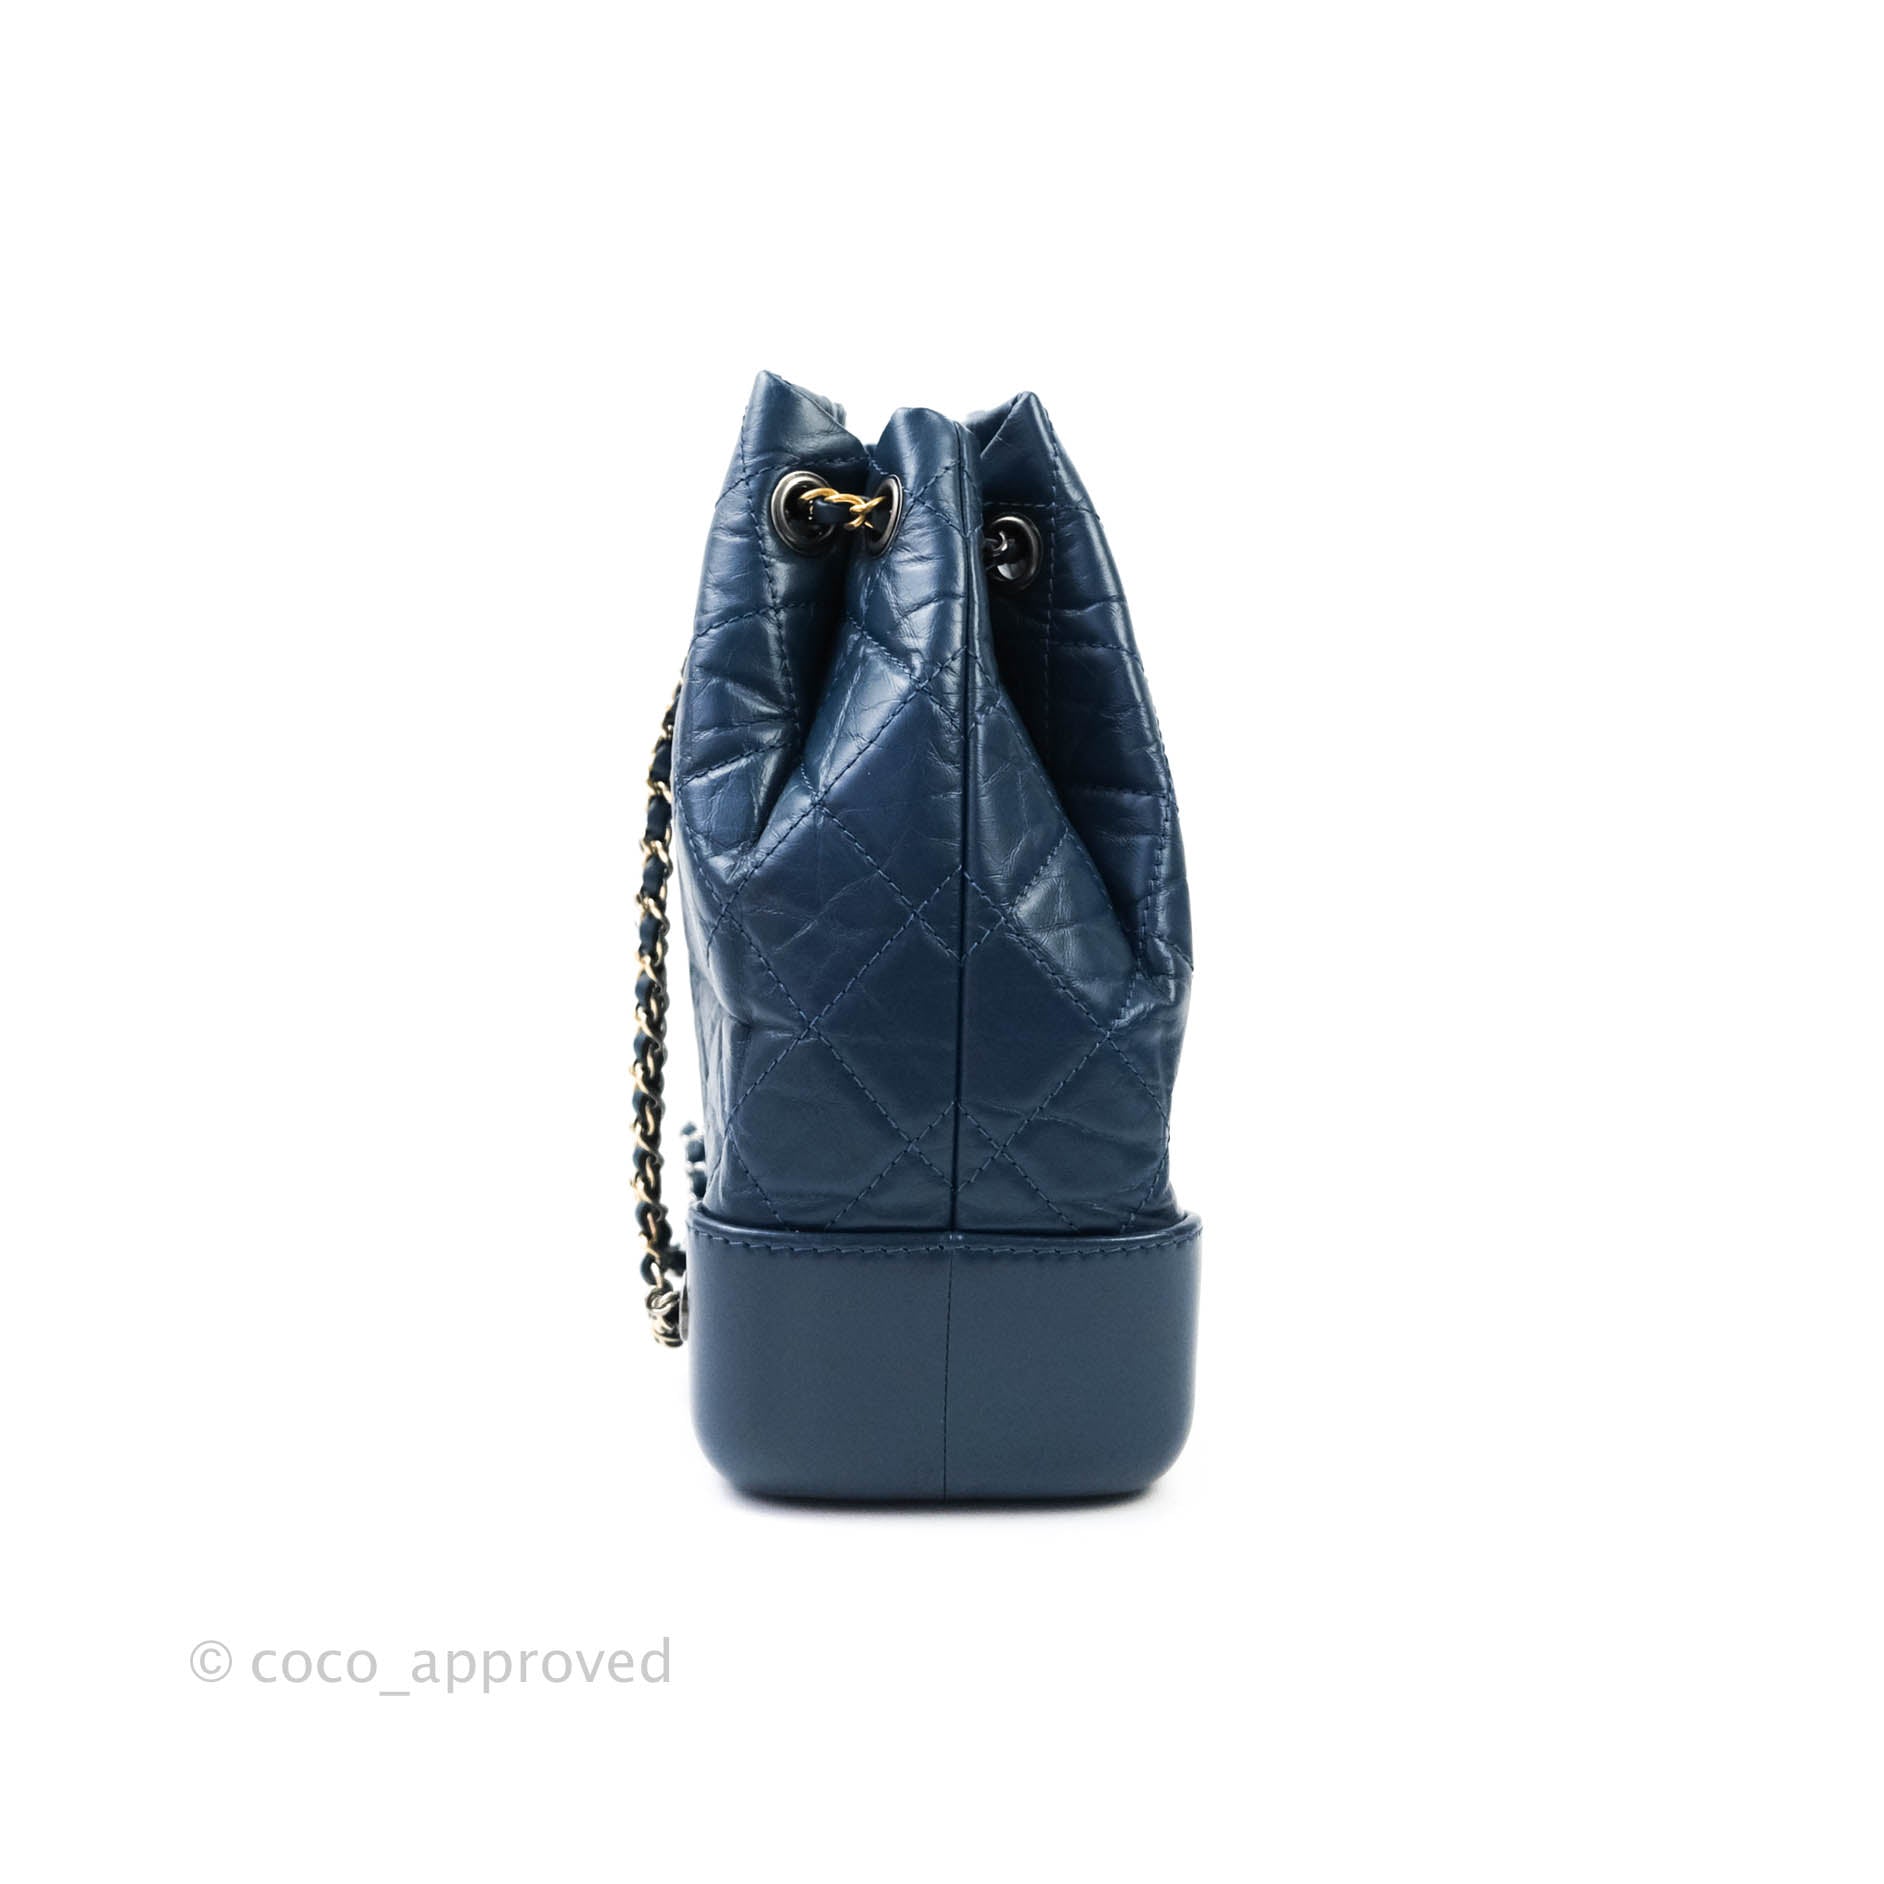 Glampot - 7321-5 A94485 Small Blue/ Black Quilted Aged Calfskin Gabrielle  Backpack Serial No: 24XXXXXX Condition: Refurbished 8.5/10 Remarks: Used in  excellent condition; replaced leather strap (lambskin) at bagspa, minor  pressmarks on